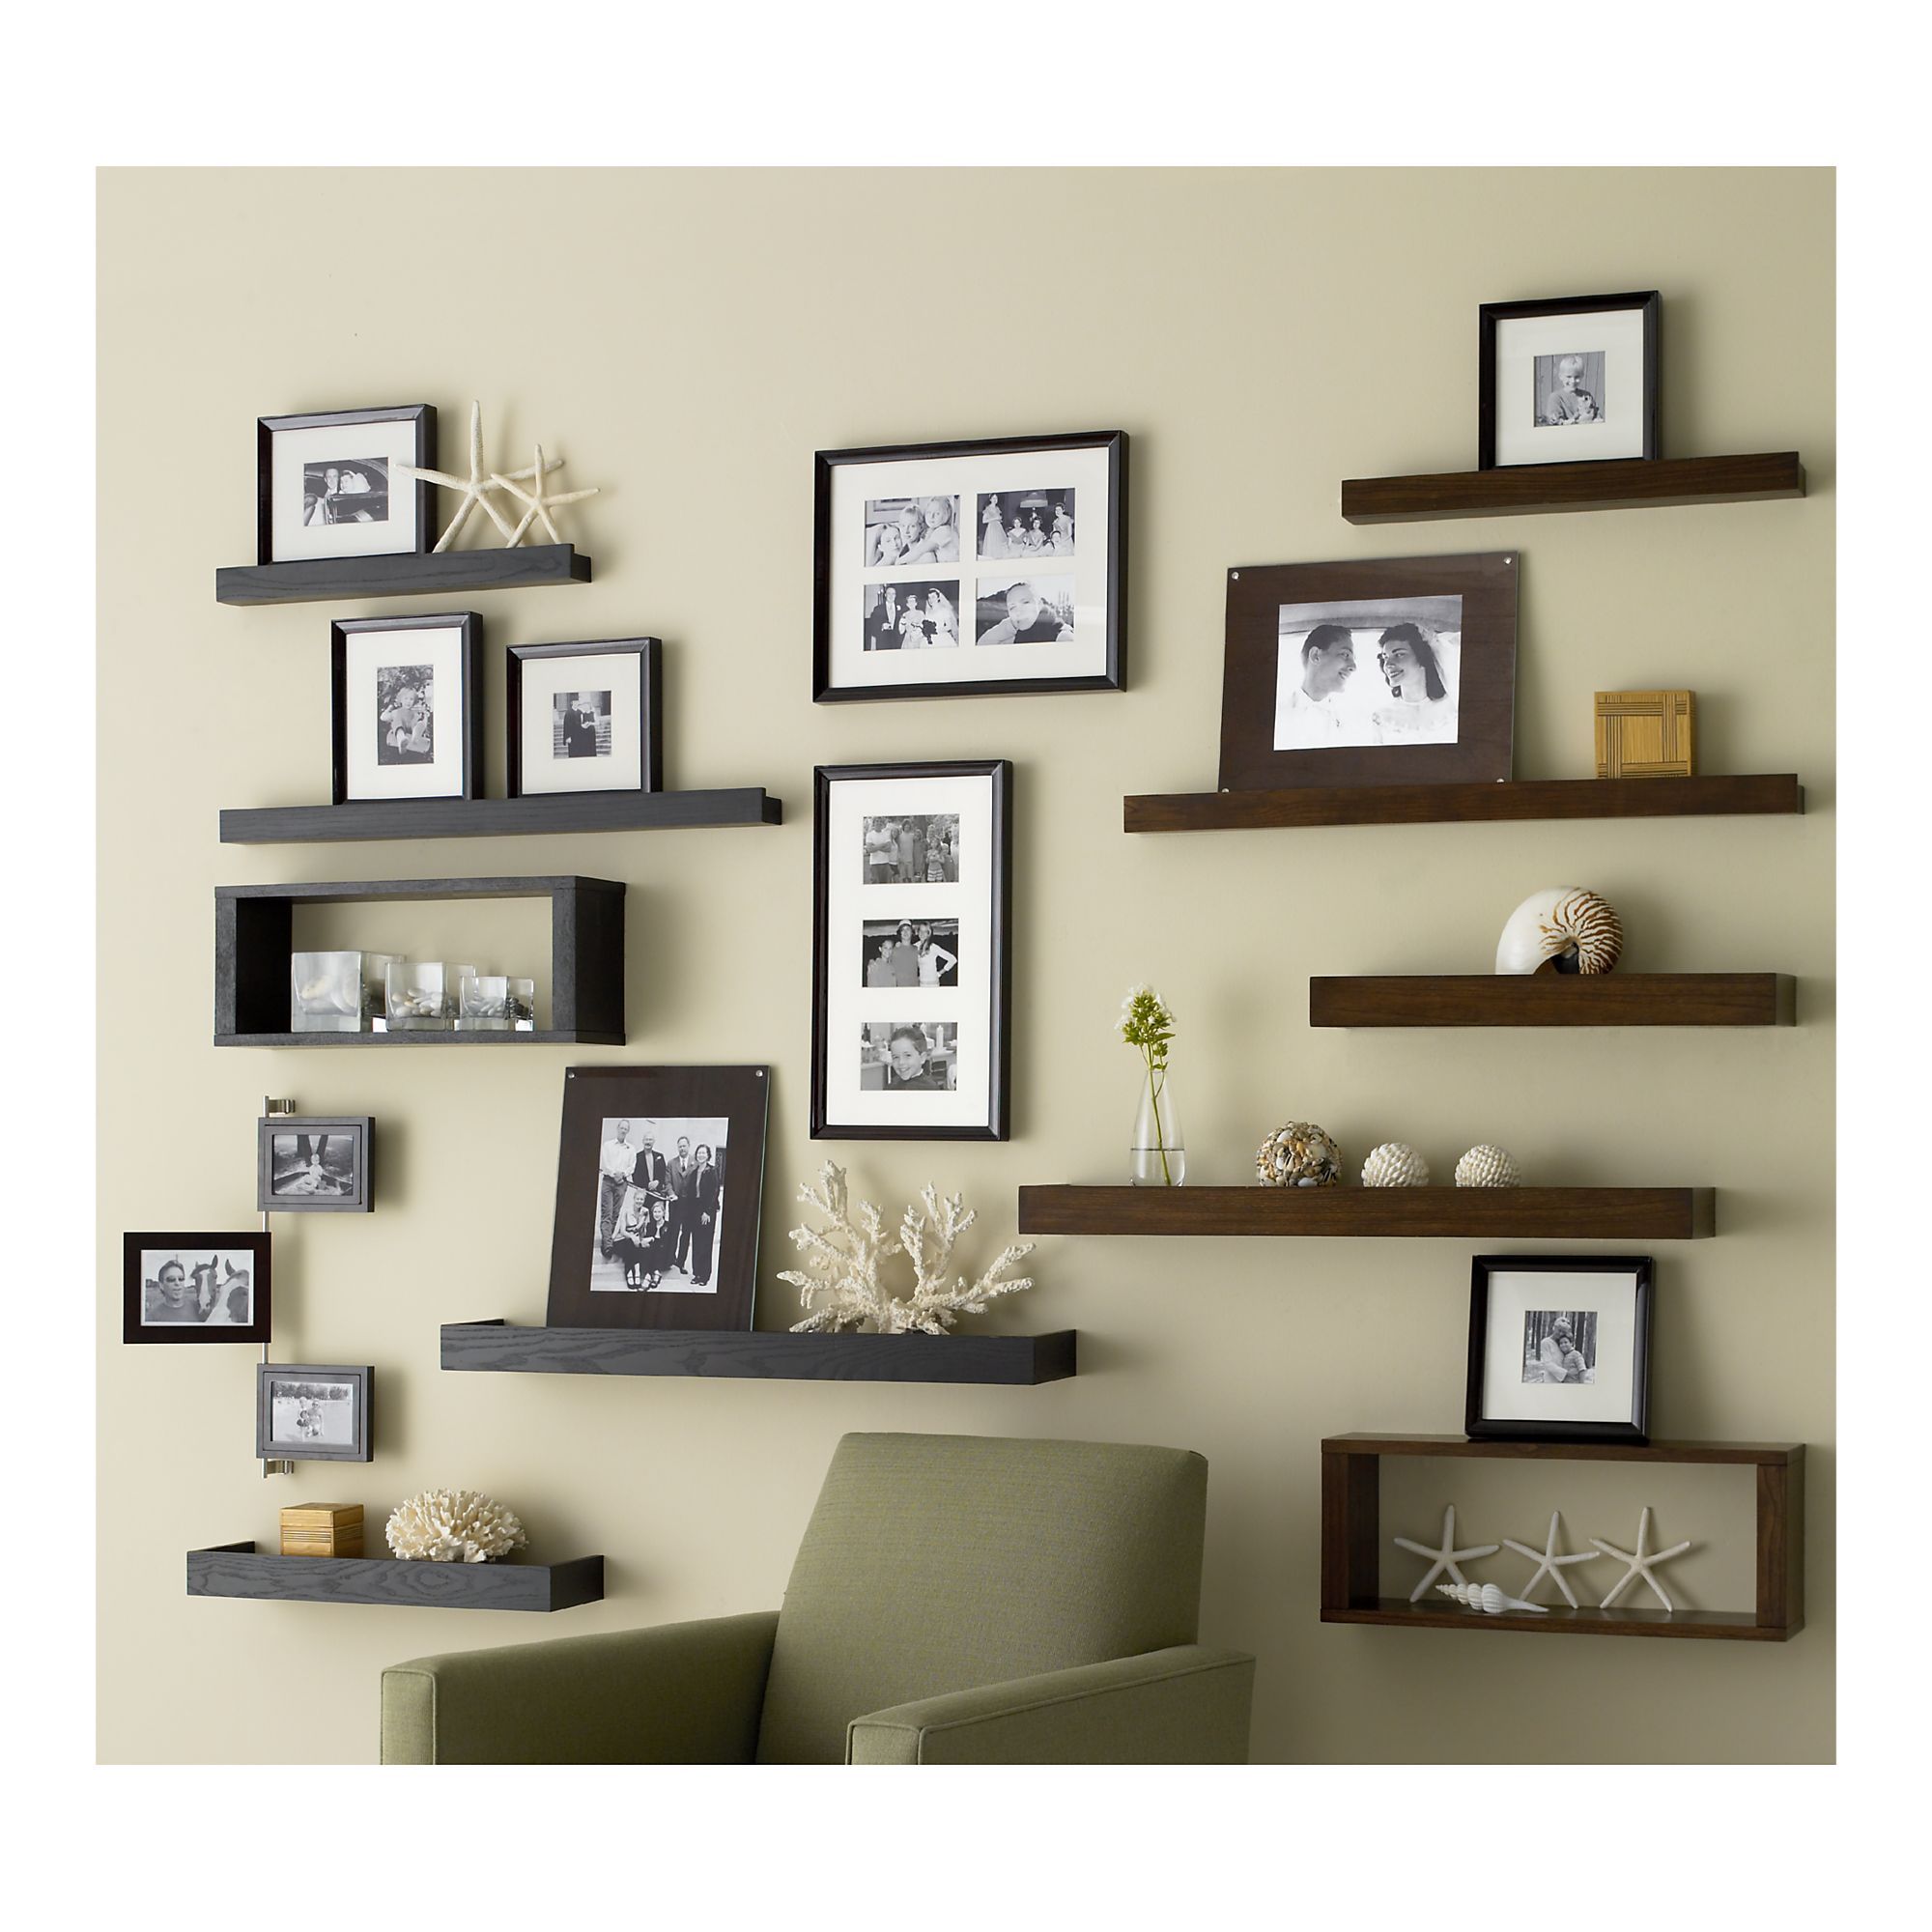 pretty wall with shelves & photos